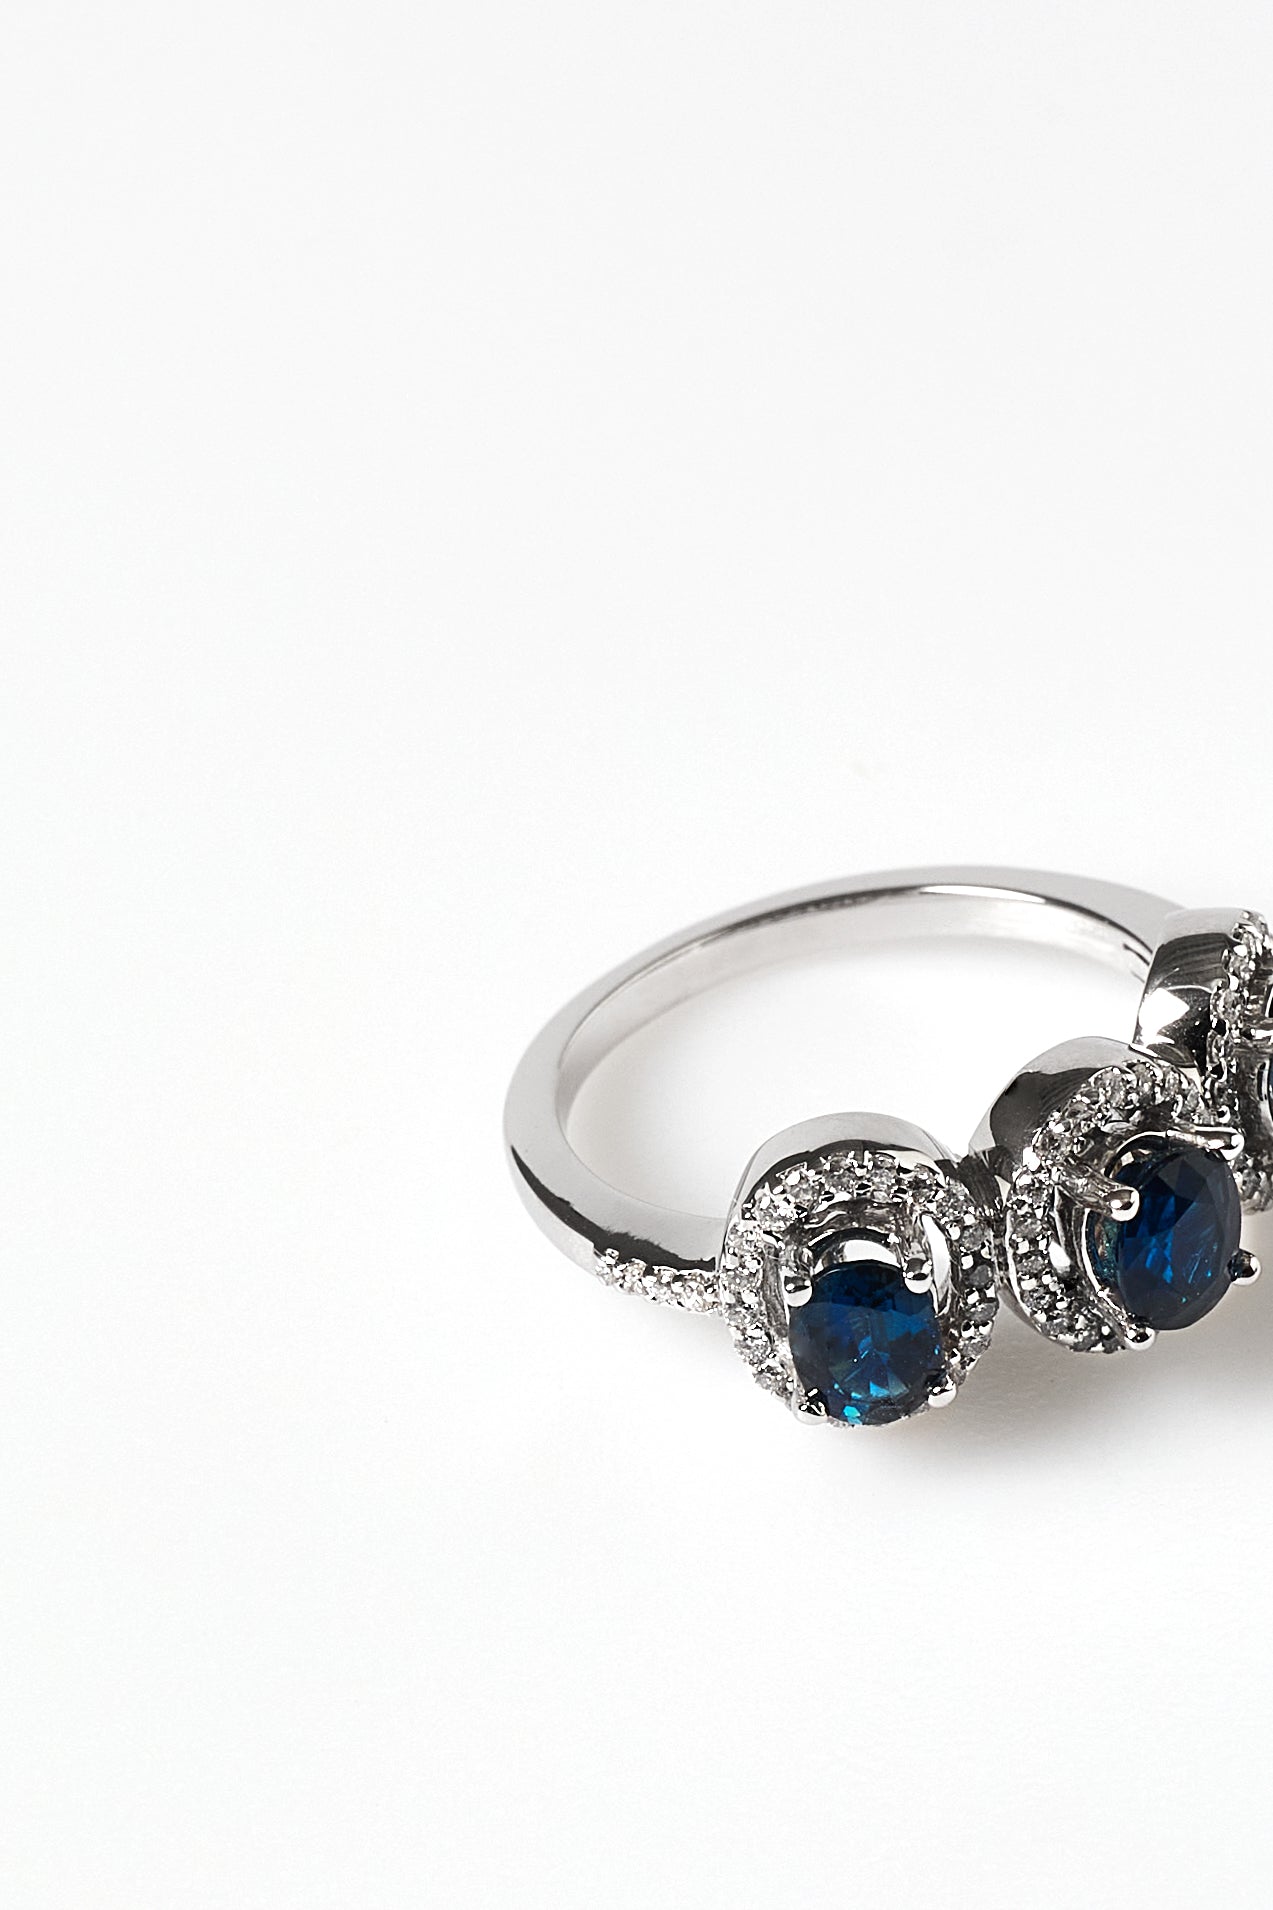 Hypnosis Blue Sapphire ring